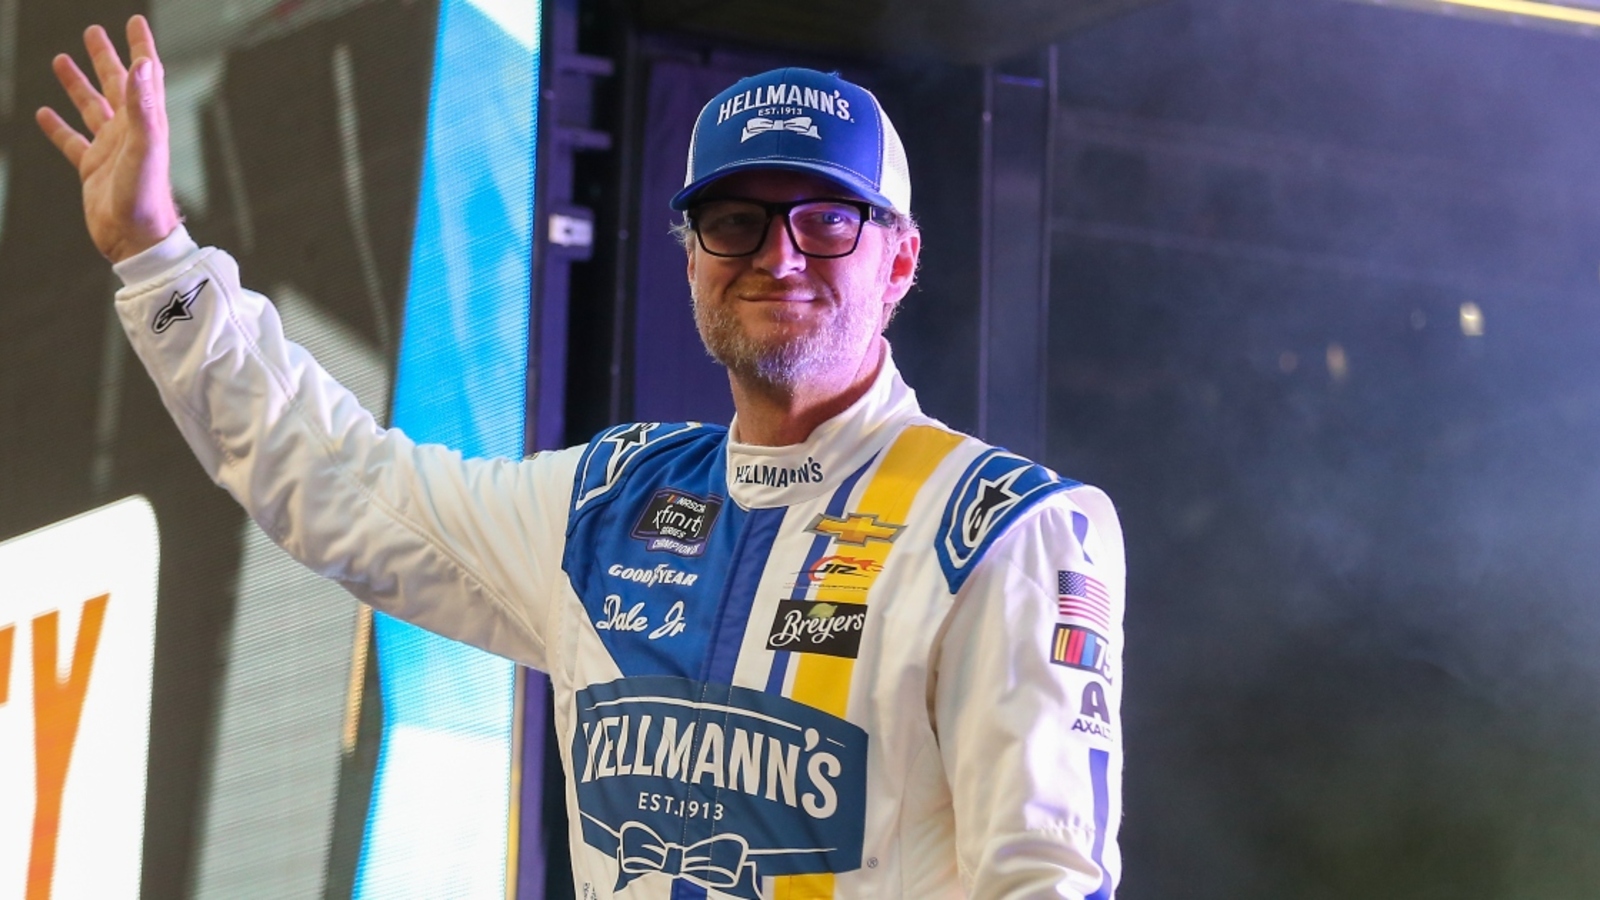 Dale Earnhardt Jr. says Fox needs to ‘rethink’ camera strategy at Atlanta Motor Speedway